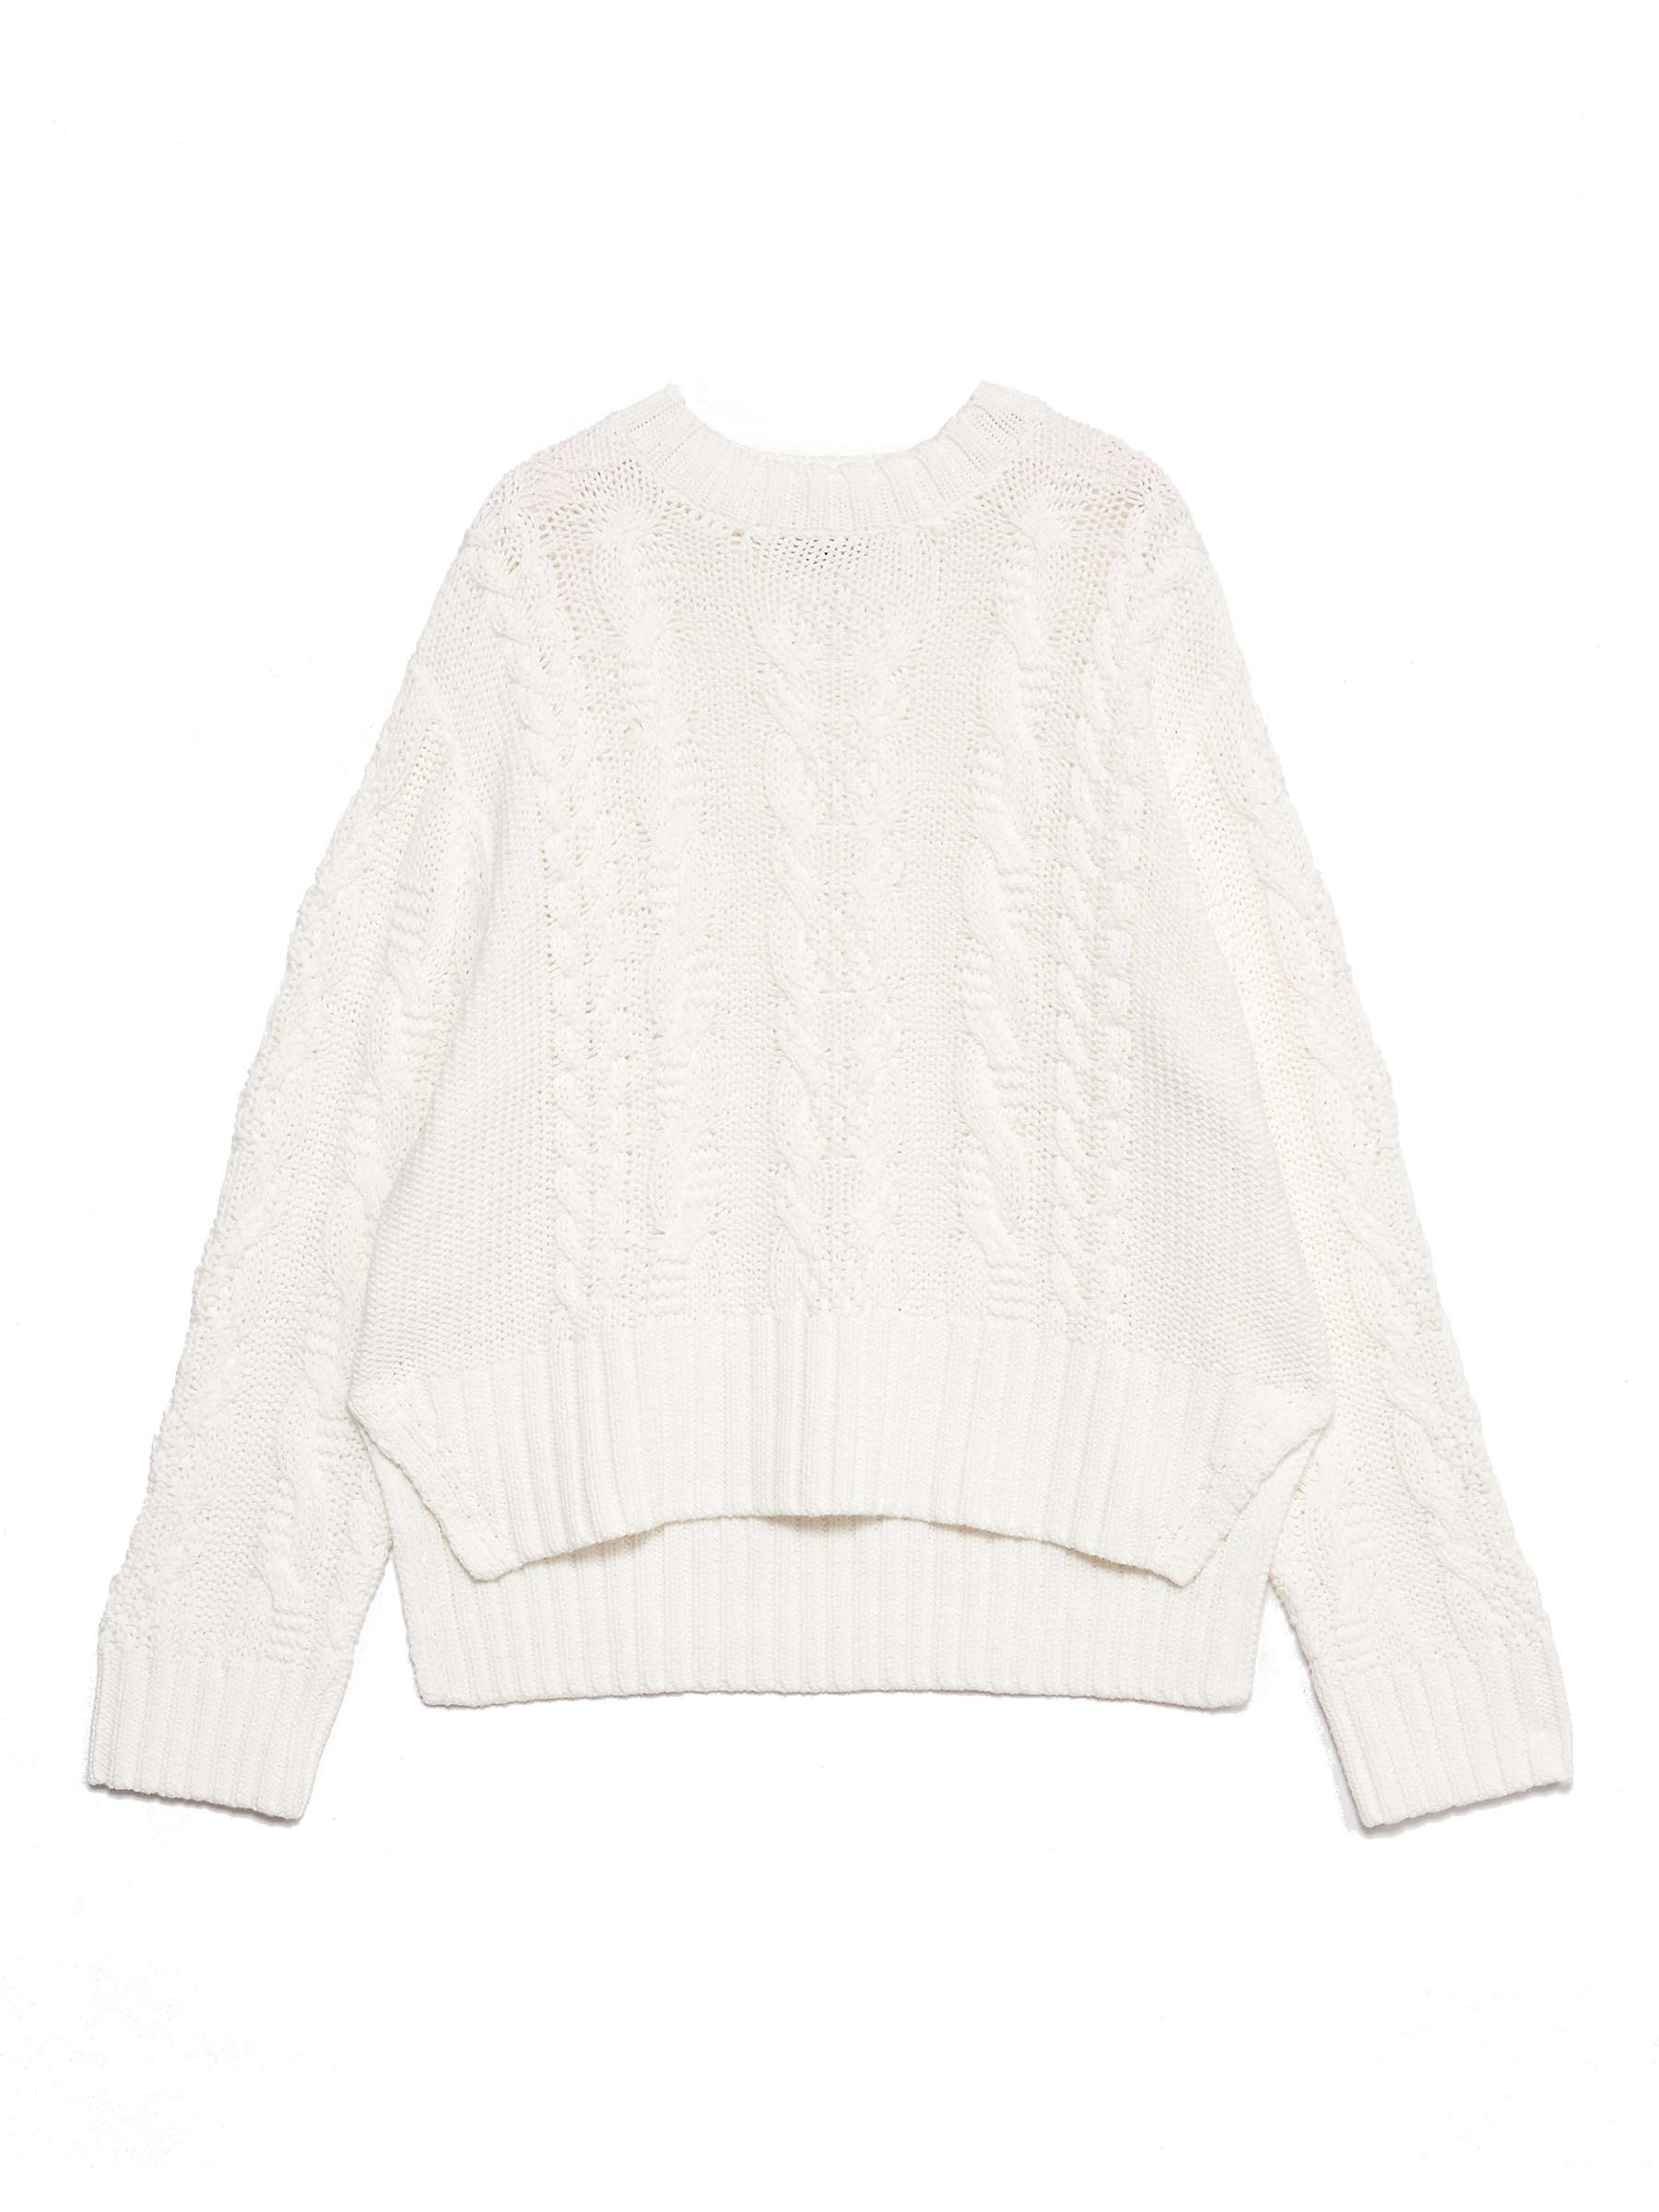 Buy Albaray Cotton Cable Knit Jumper, Cream Online at johnlewis.com